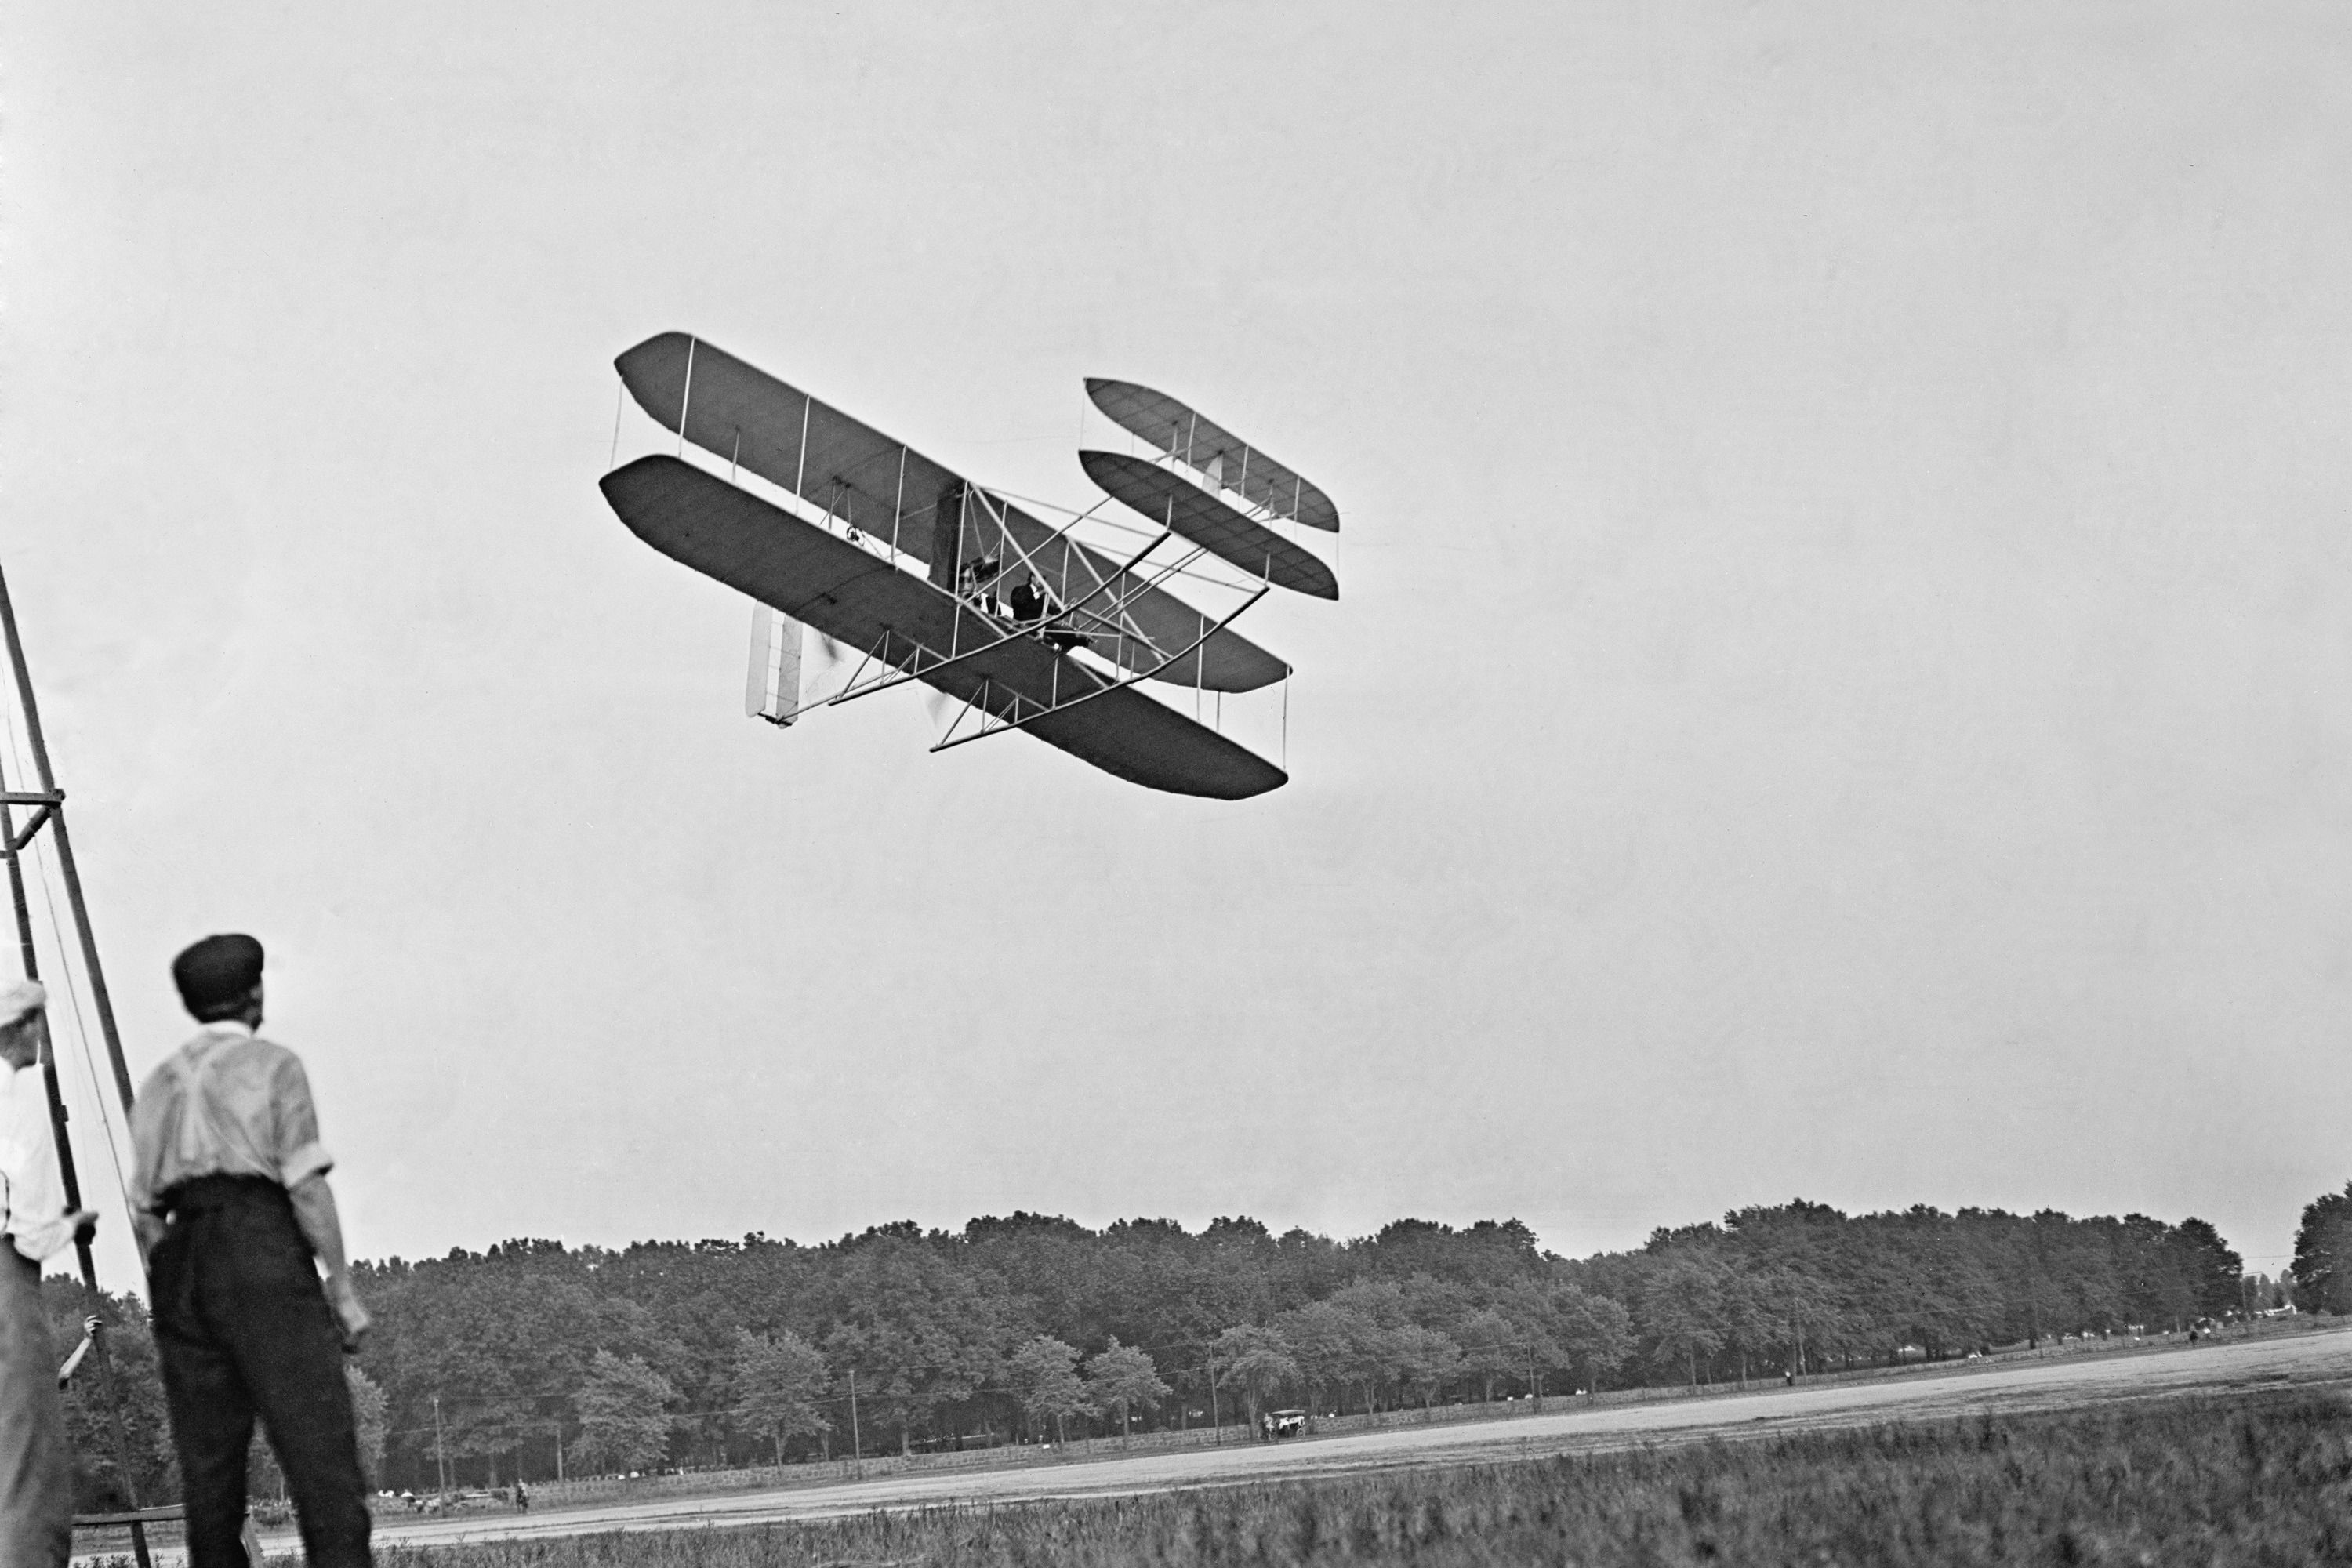 Wright's airplane in Army trial flights at Fort Meyer Virginia in July 1909.